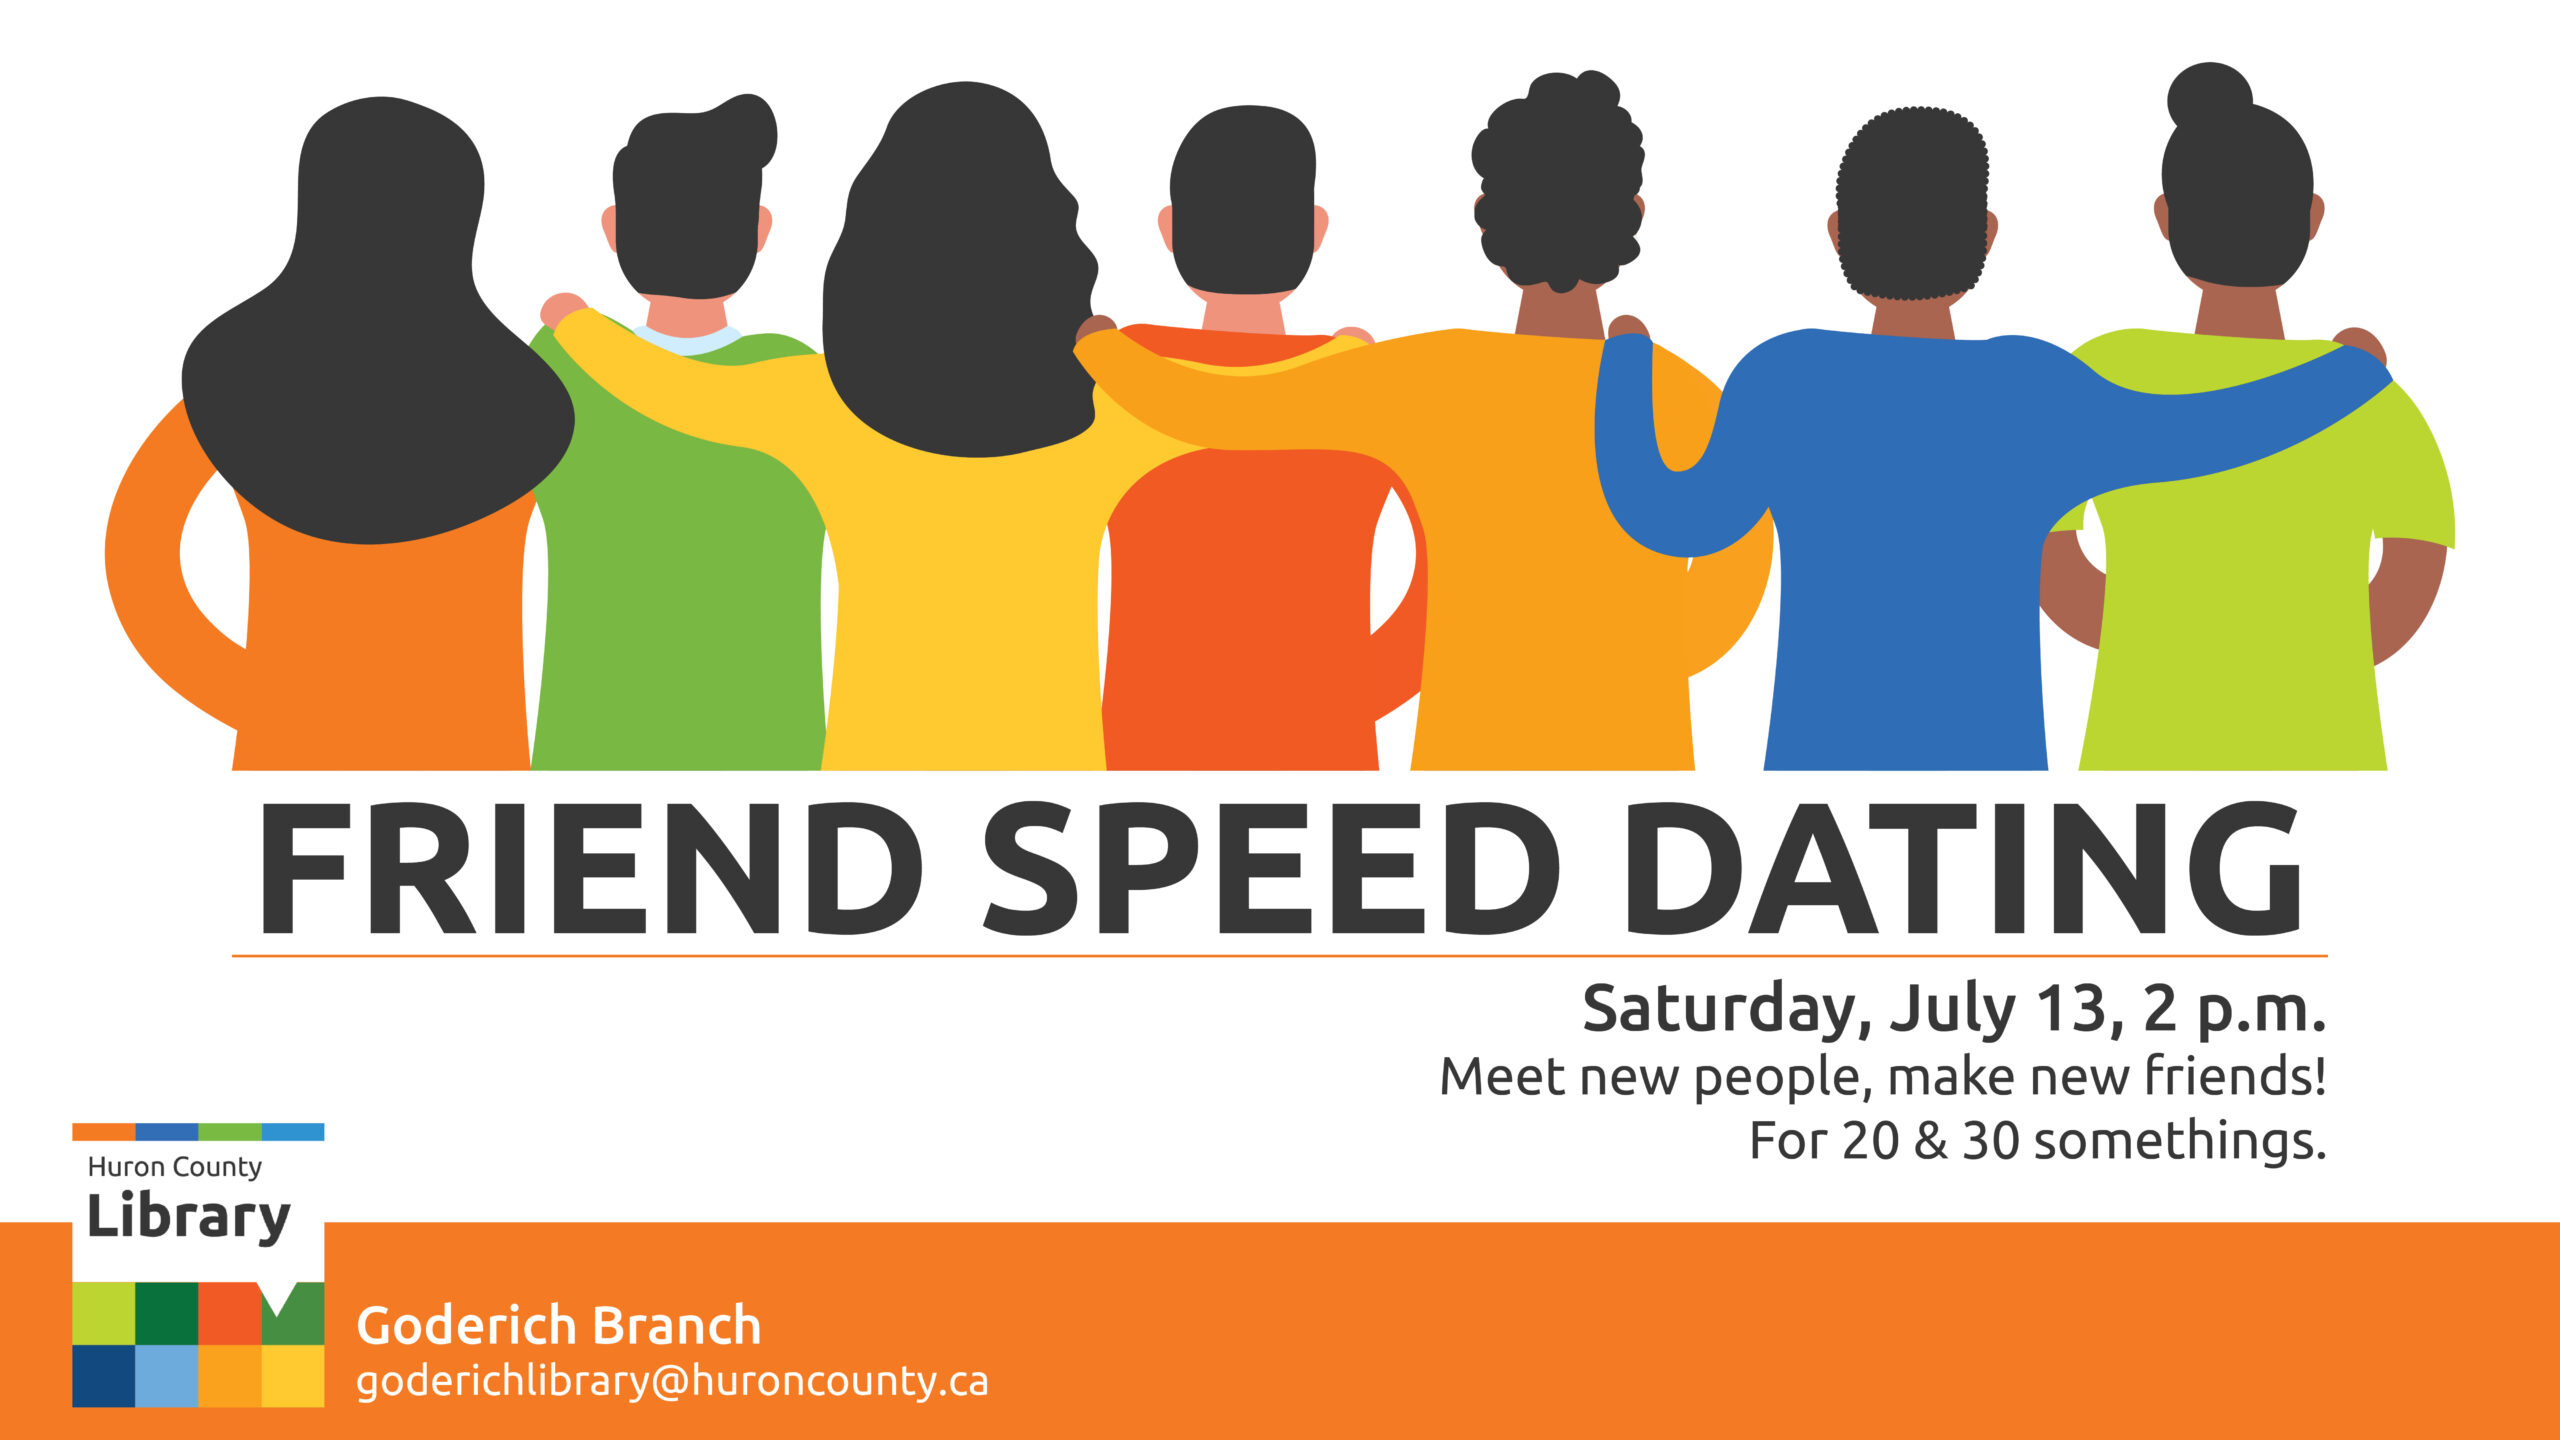 Illustration of a group of friends with text promoting friend speed dating at Goderich